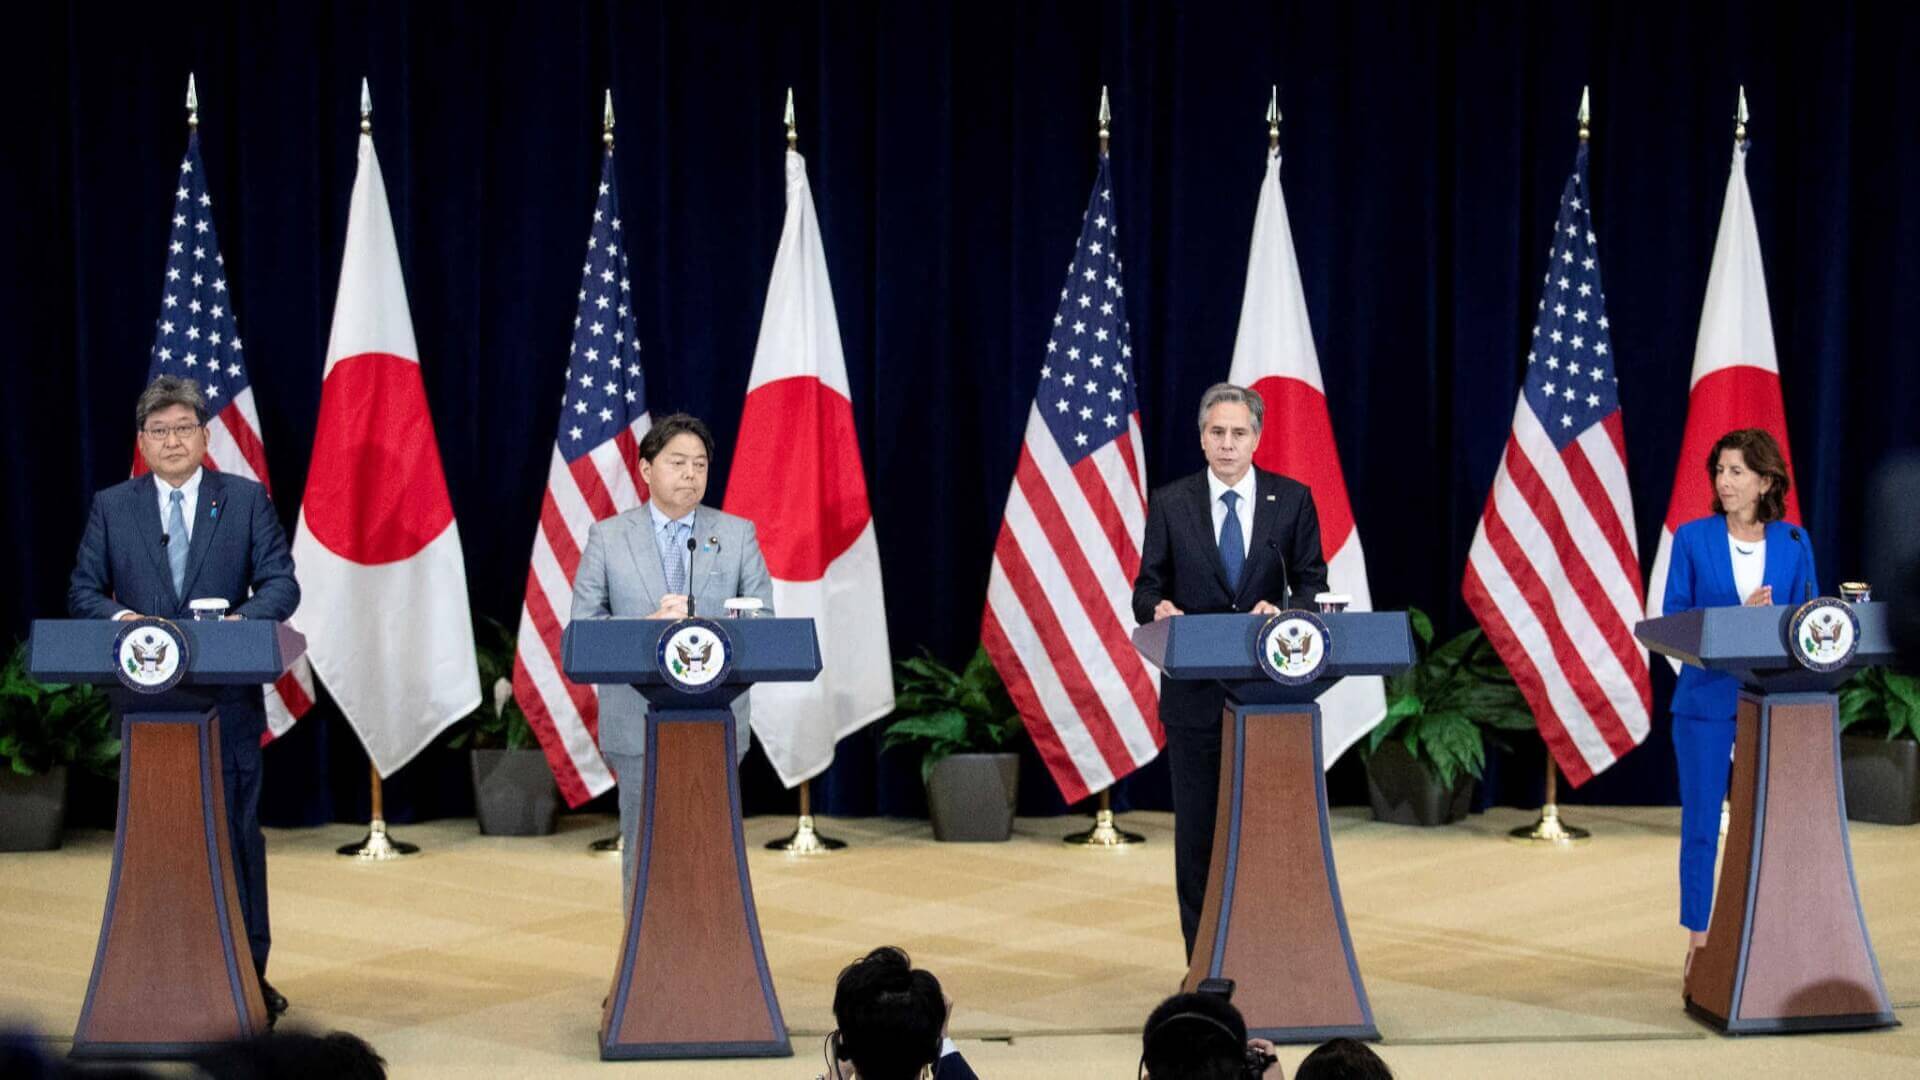 US, Japan Denounce Russian Aggression, China’s “Opaque Lending Practices” in 2+2 Meeting